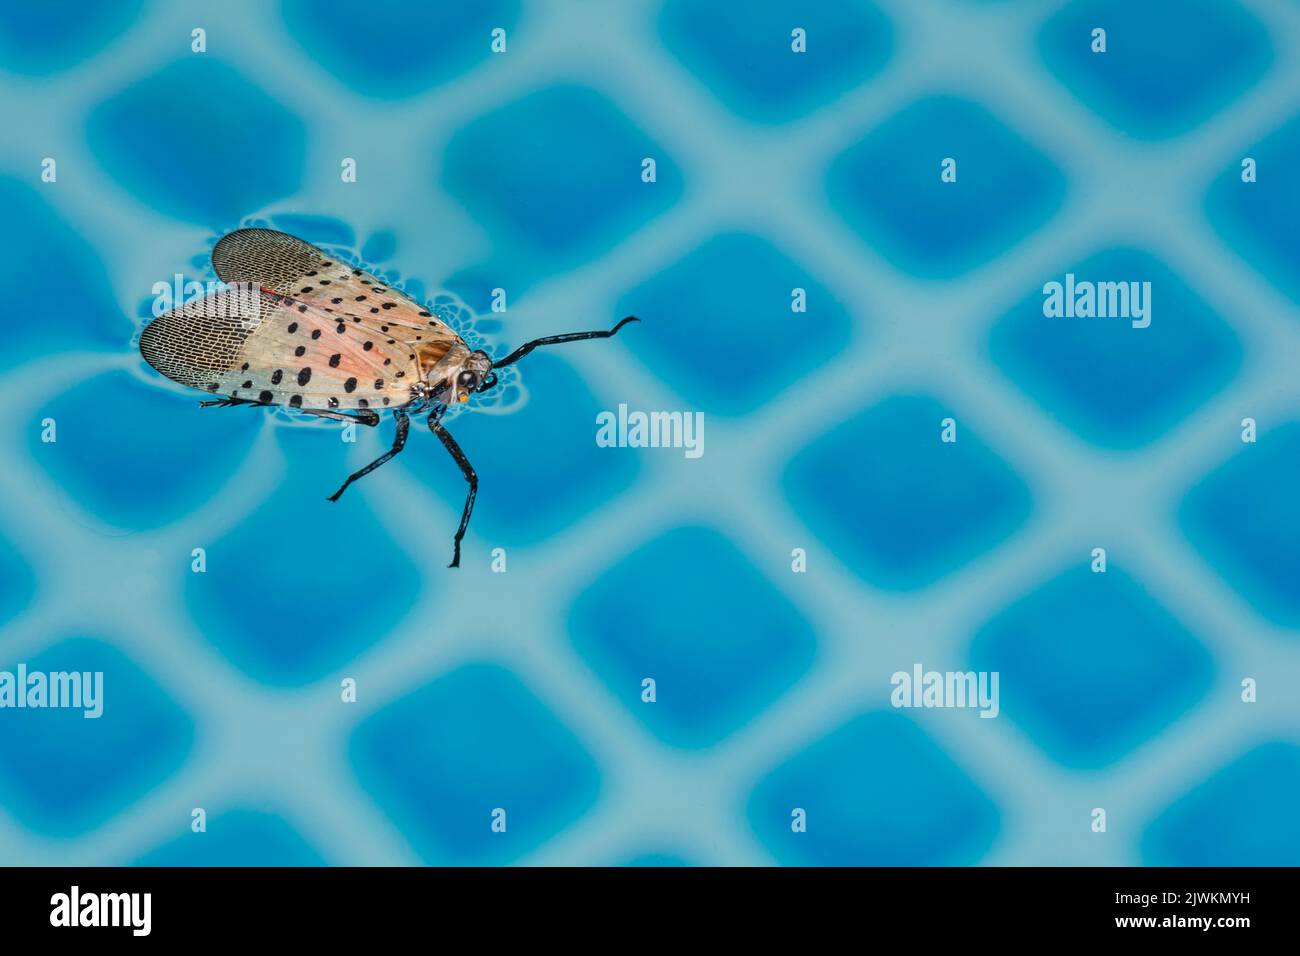 A Spotted Lanternfly stuck in a swimming pool in New Jersey Stock Photo